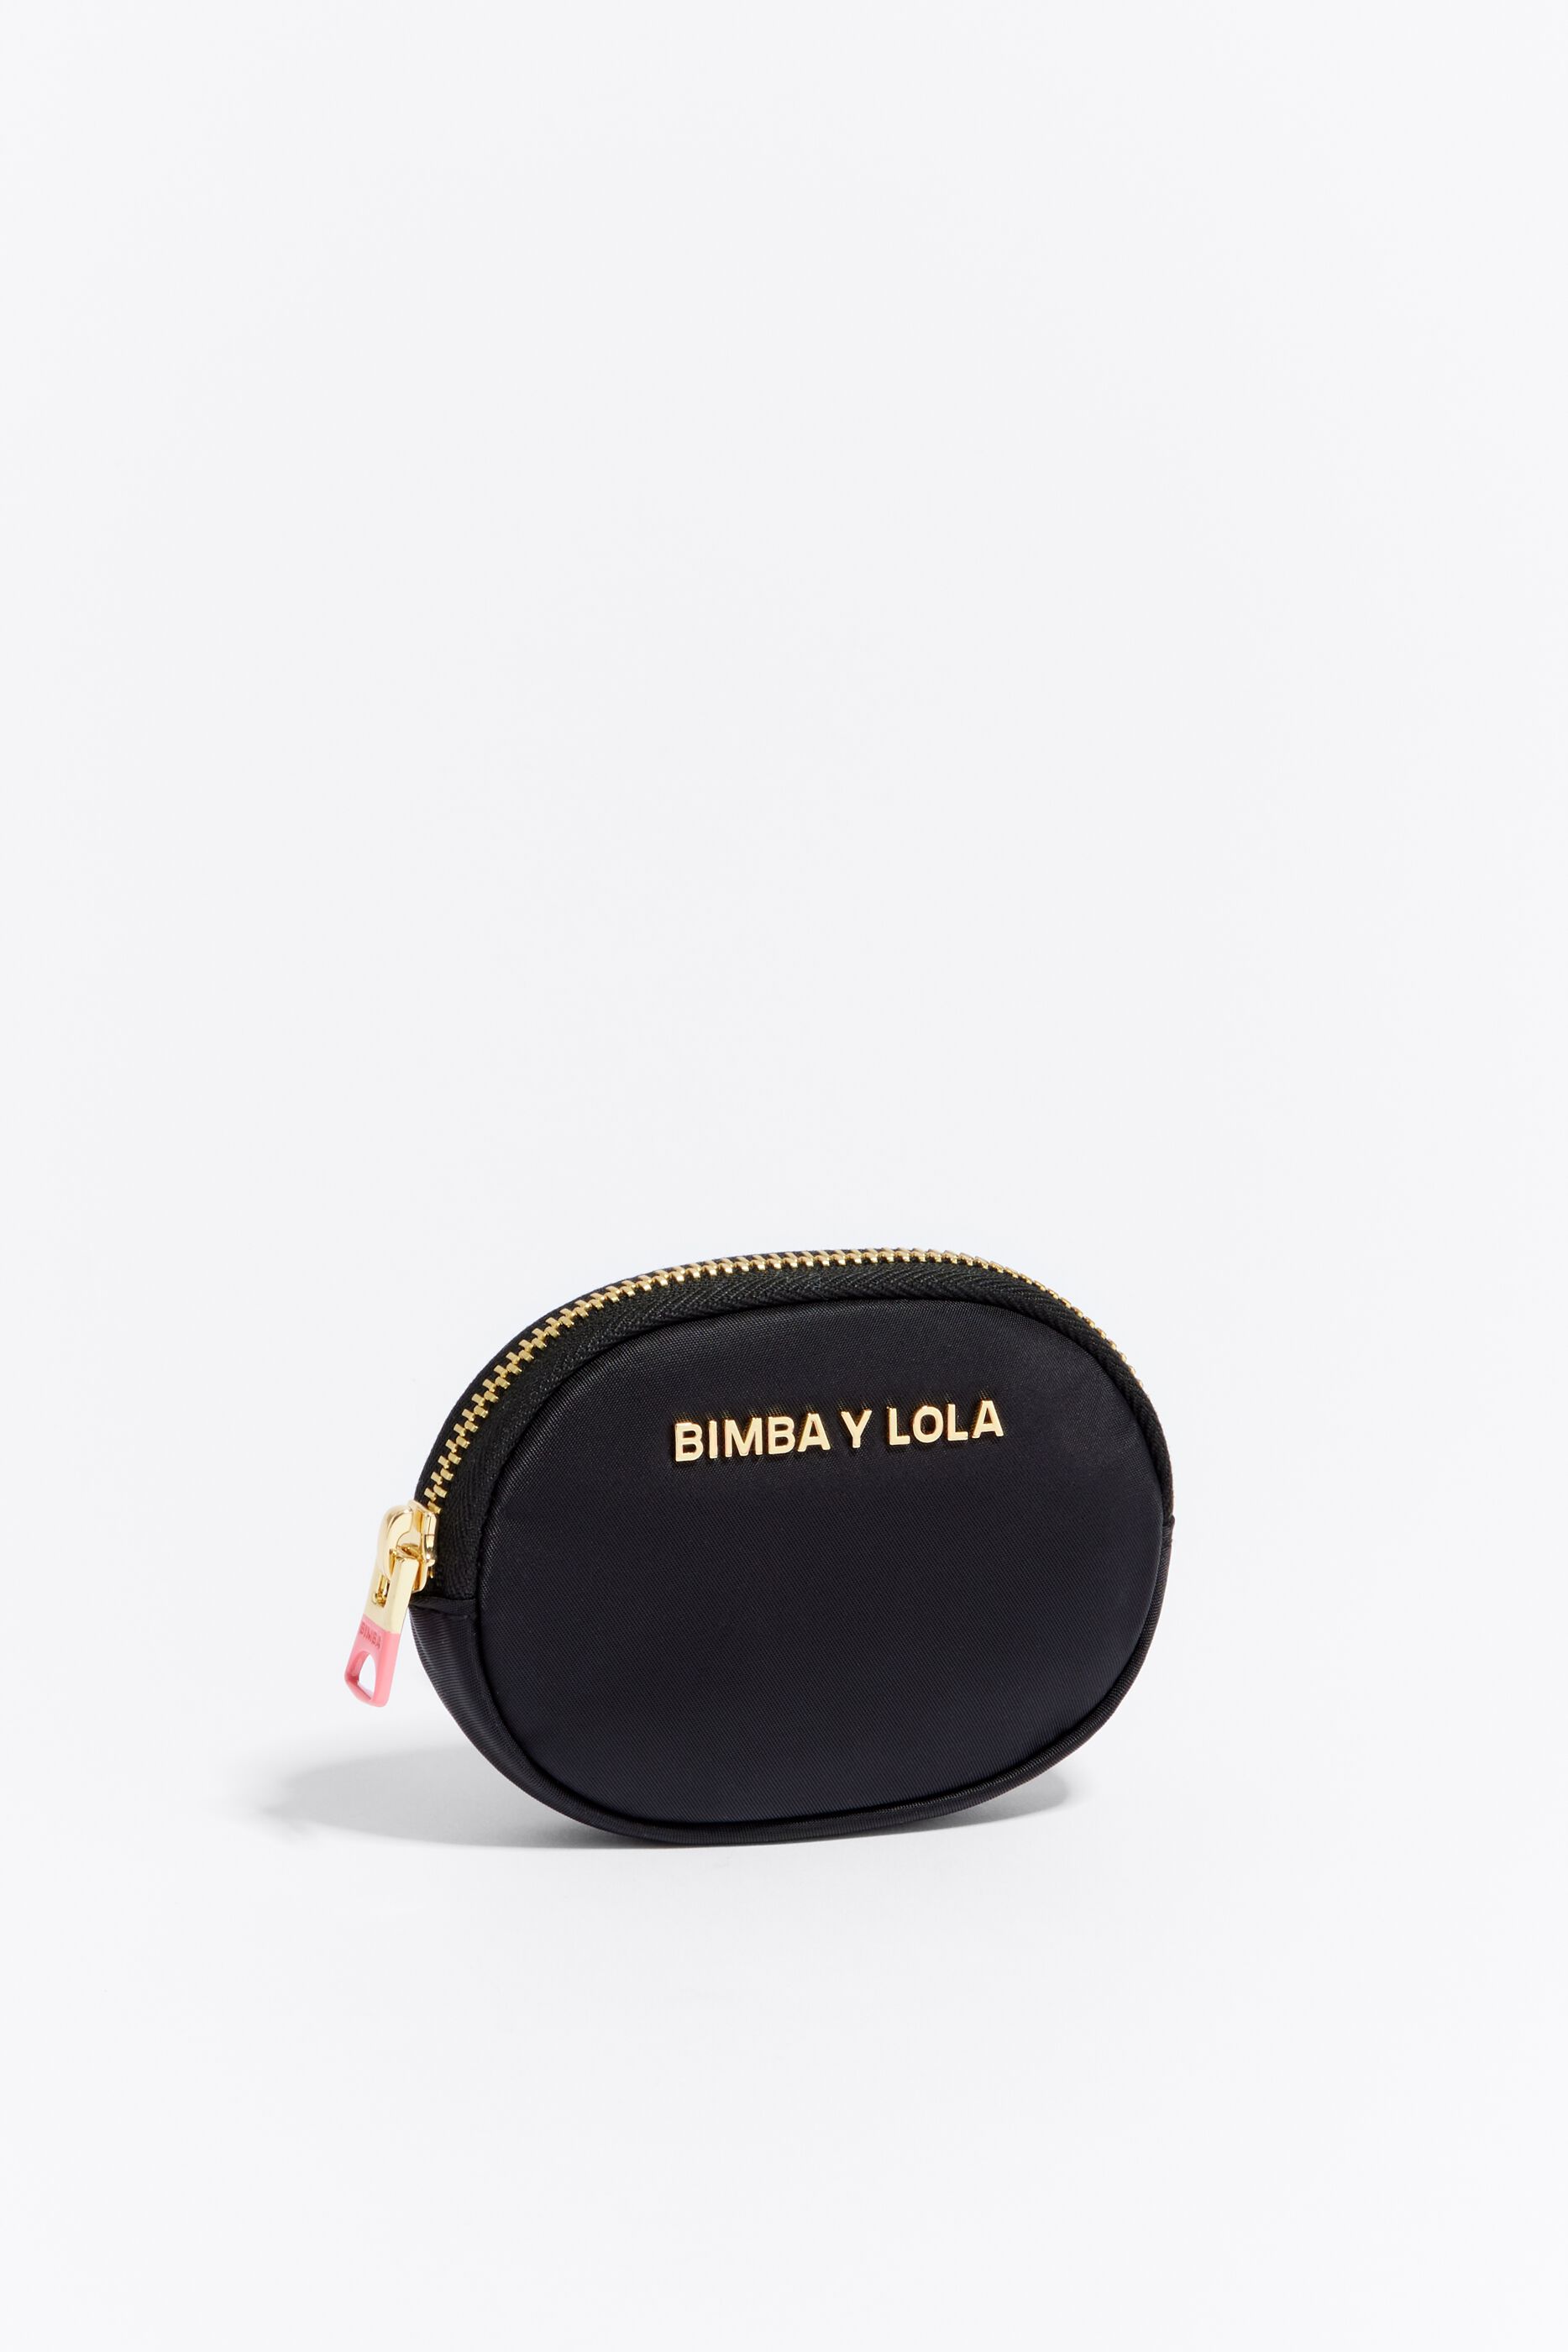 Buy CARPISA Black Solid Coin Purse - Clutches for Women 7673491 | Myntra